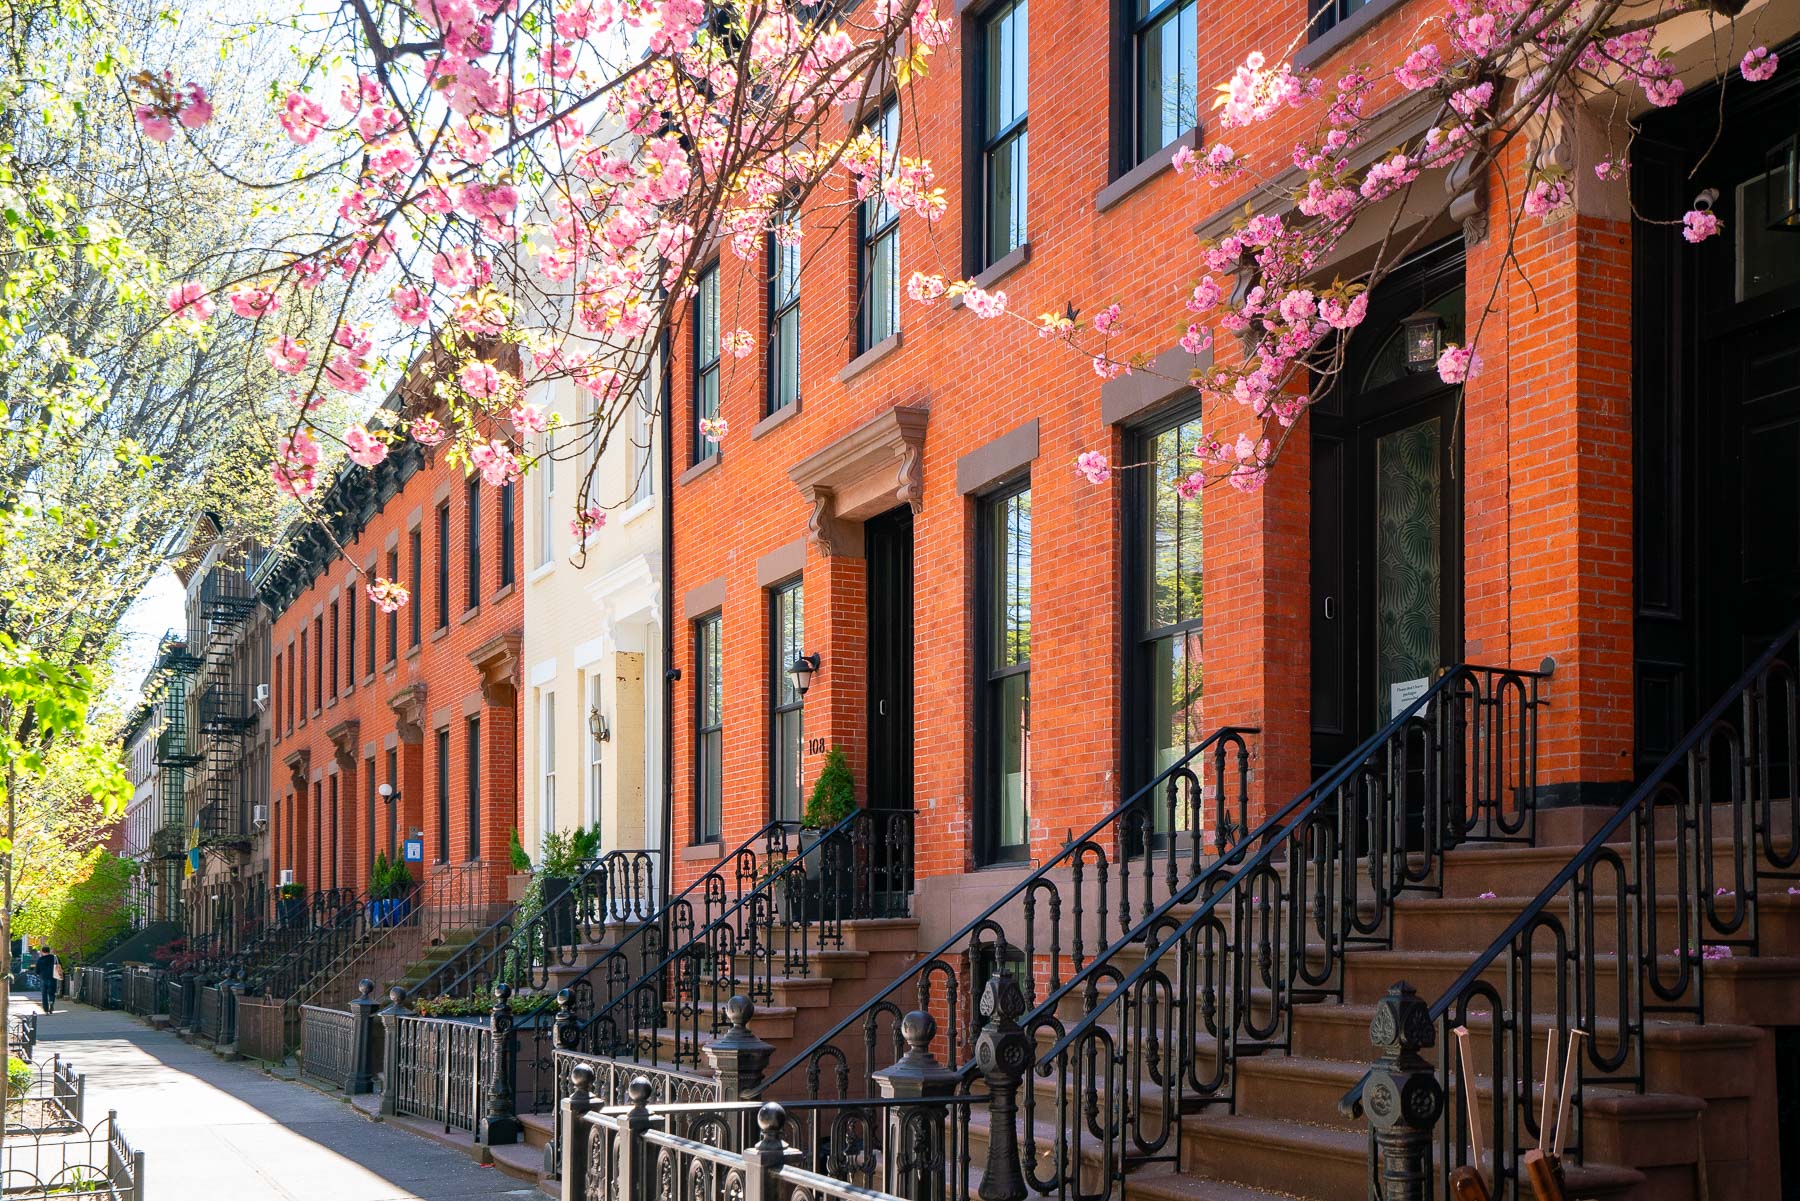 Brick rowhouses on a sunny day under a blooming cherry tree in Cobble Hill, Brooklyn